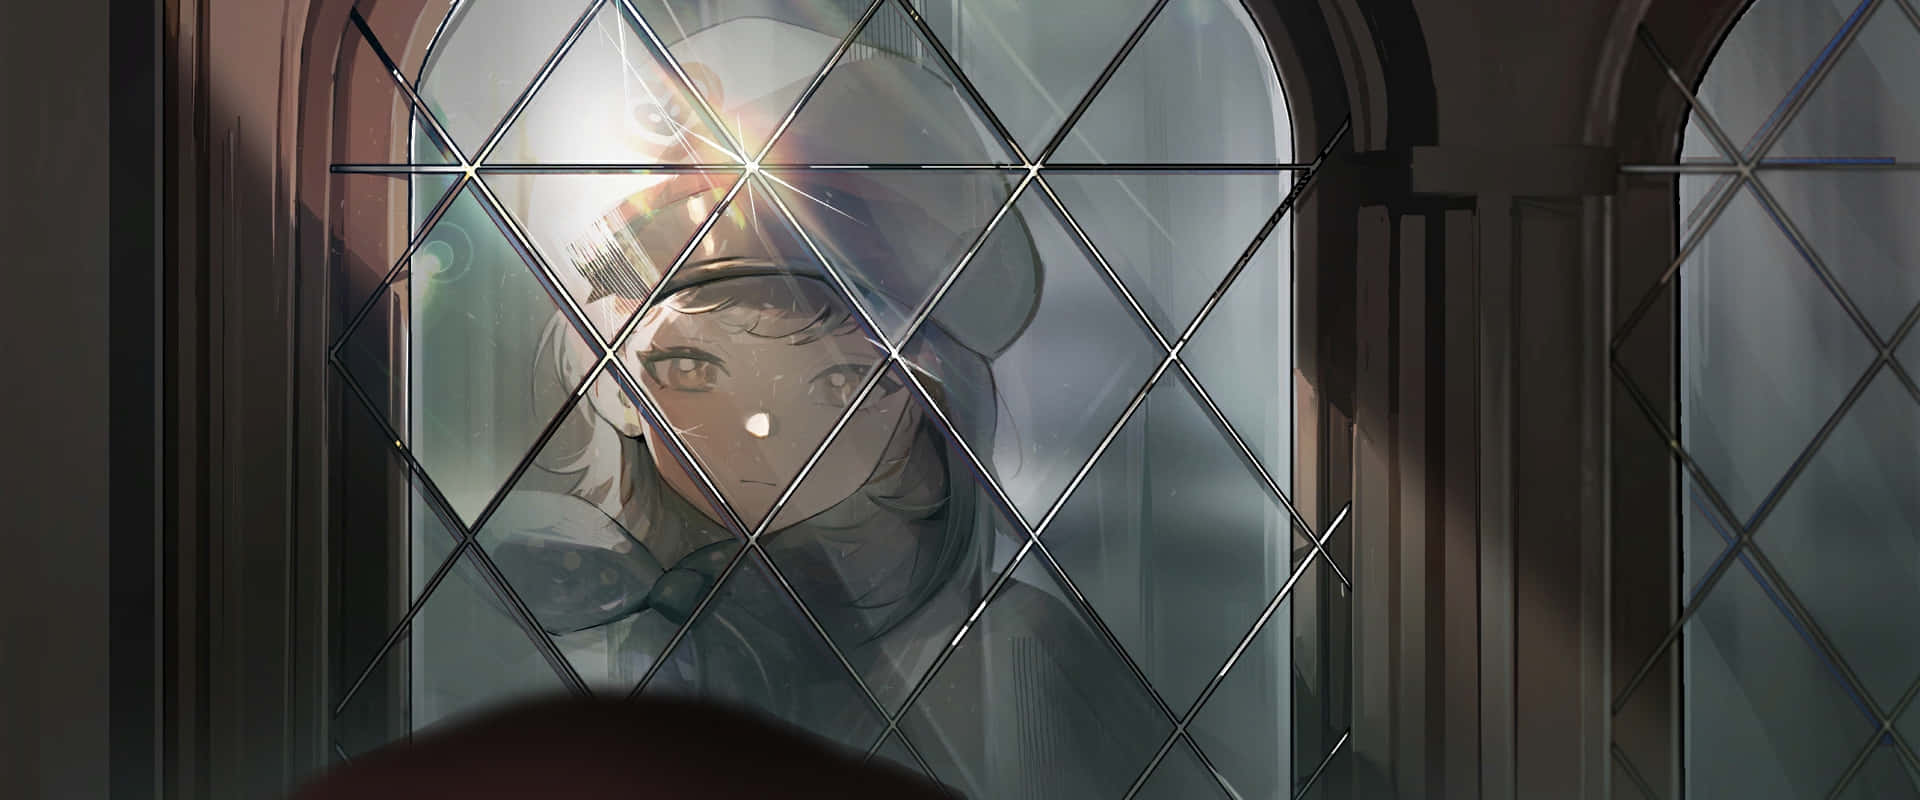 Mysterious_ Gaze_ Through_ Stained_ Glass Wallpaper